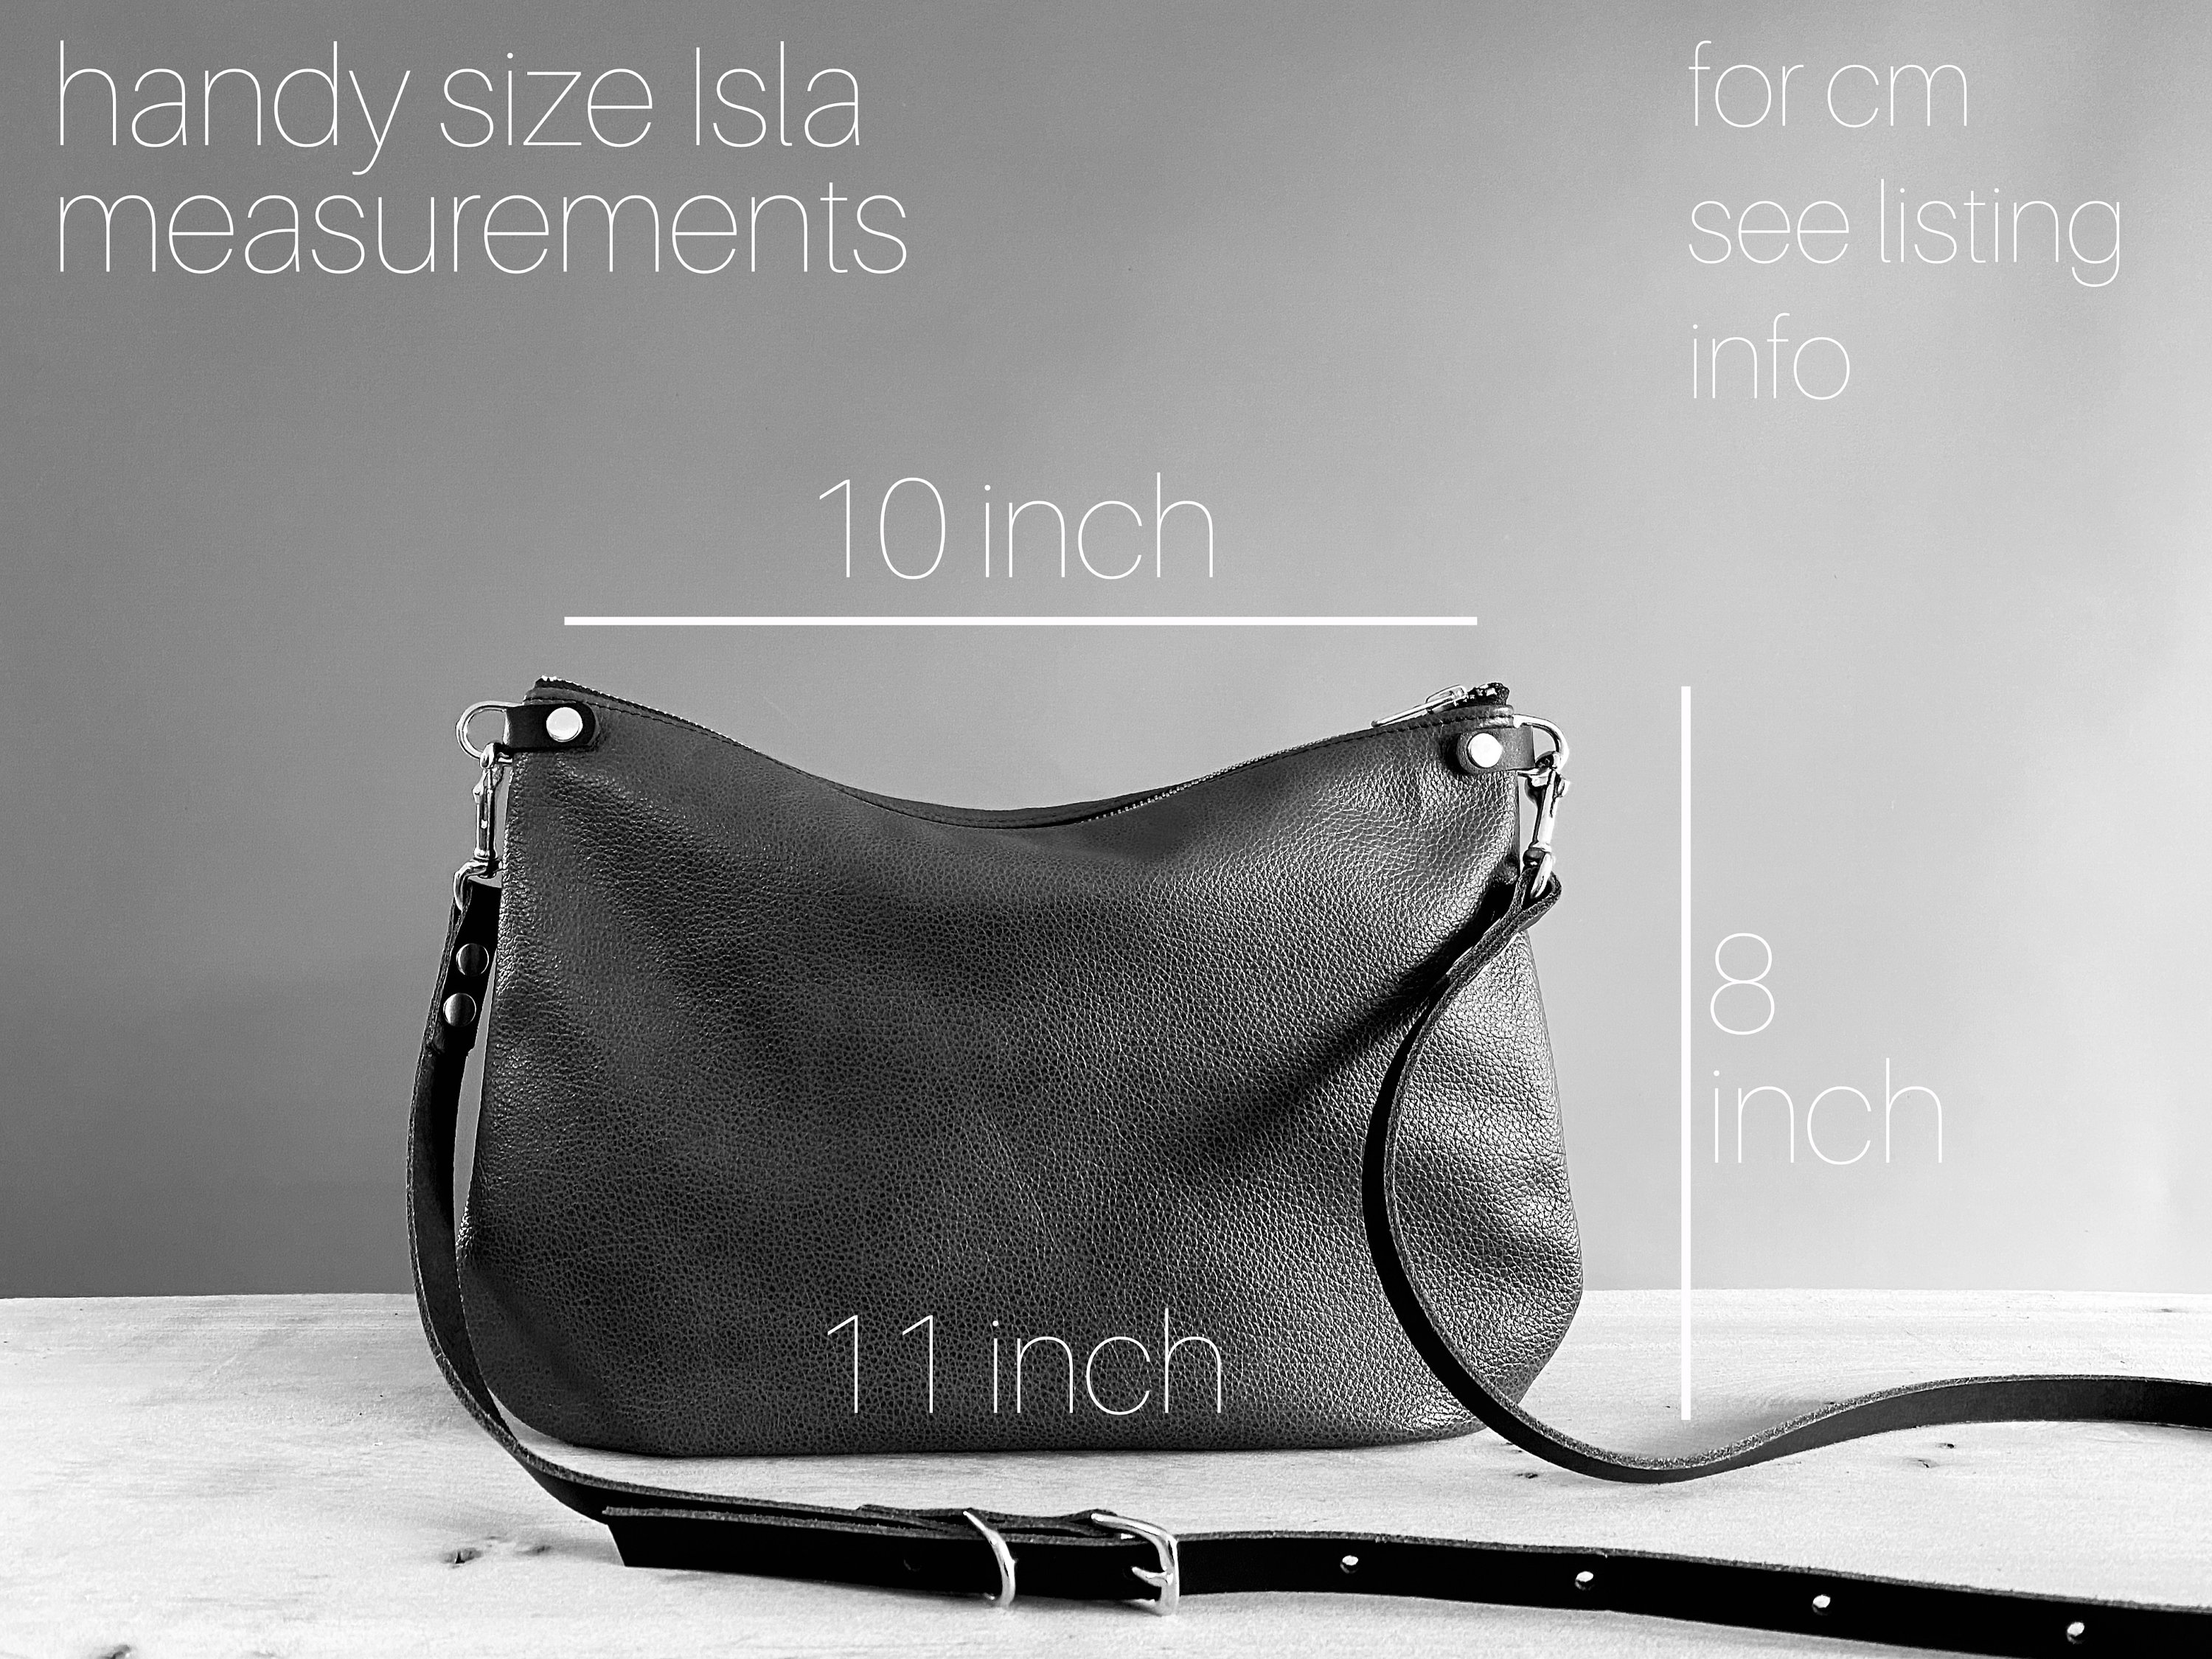 Handy Sandy Bags - Change the way you use EVERYDAY items